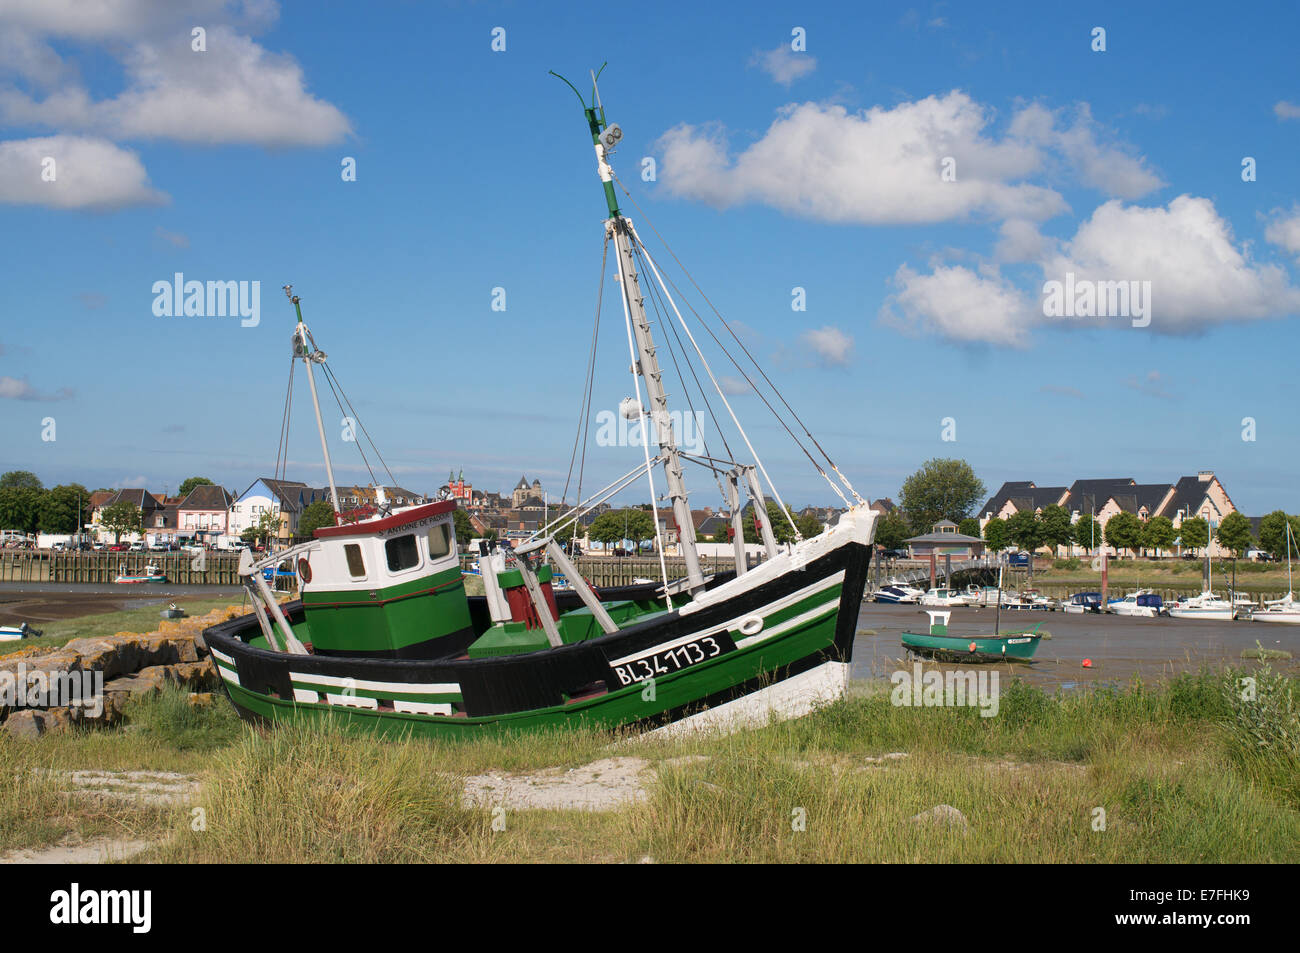 Restored fishing boat Saint-Antoine-de-Padoue at Le Crotoy, Somme, Picardie, France, Europe Stock Photo